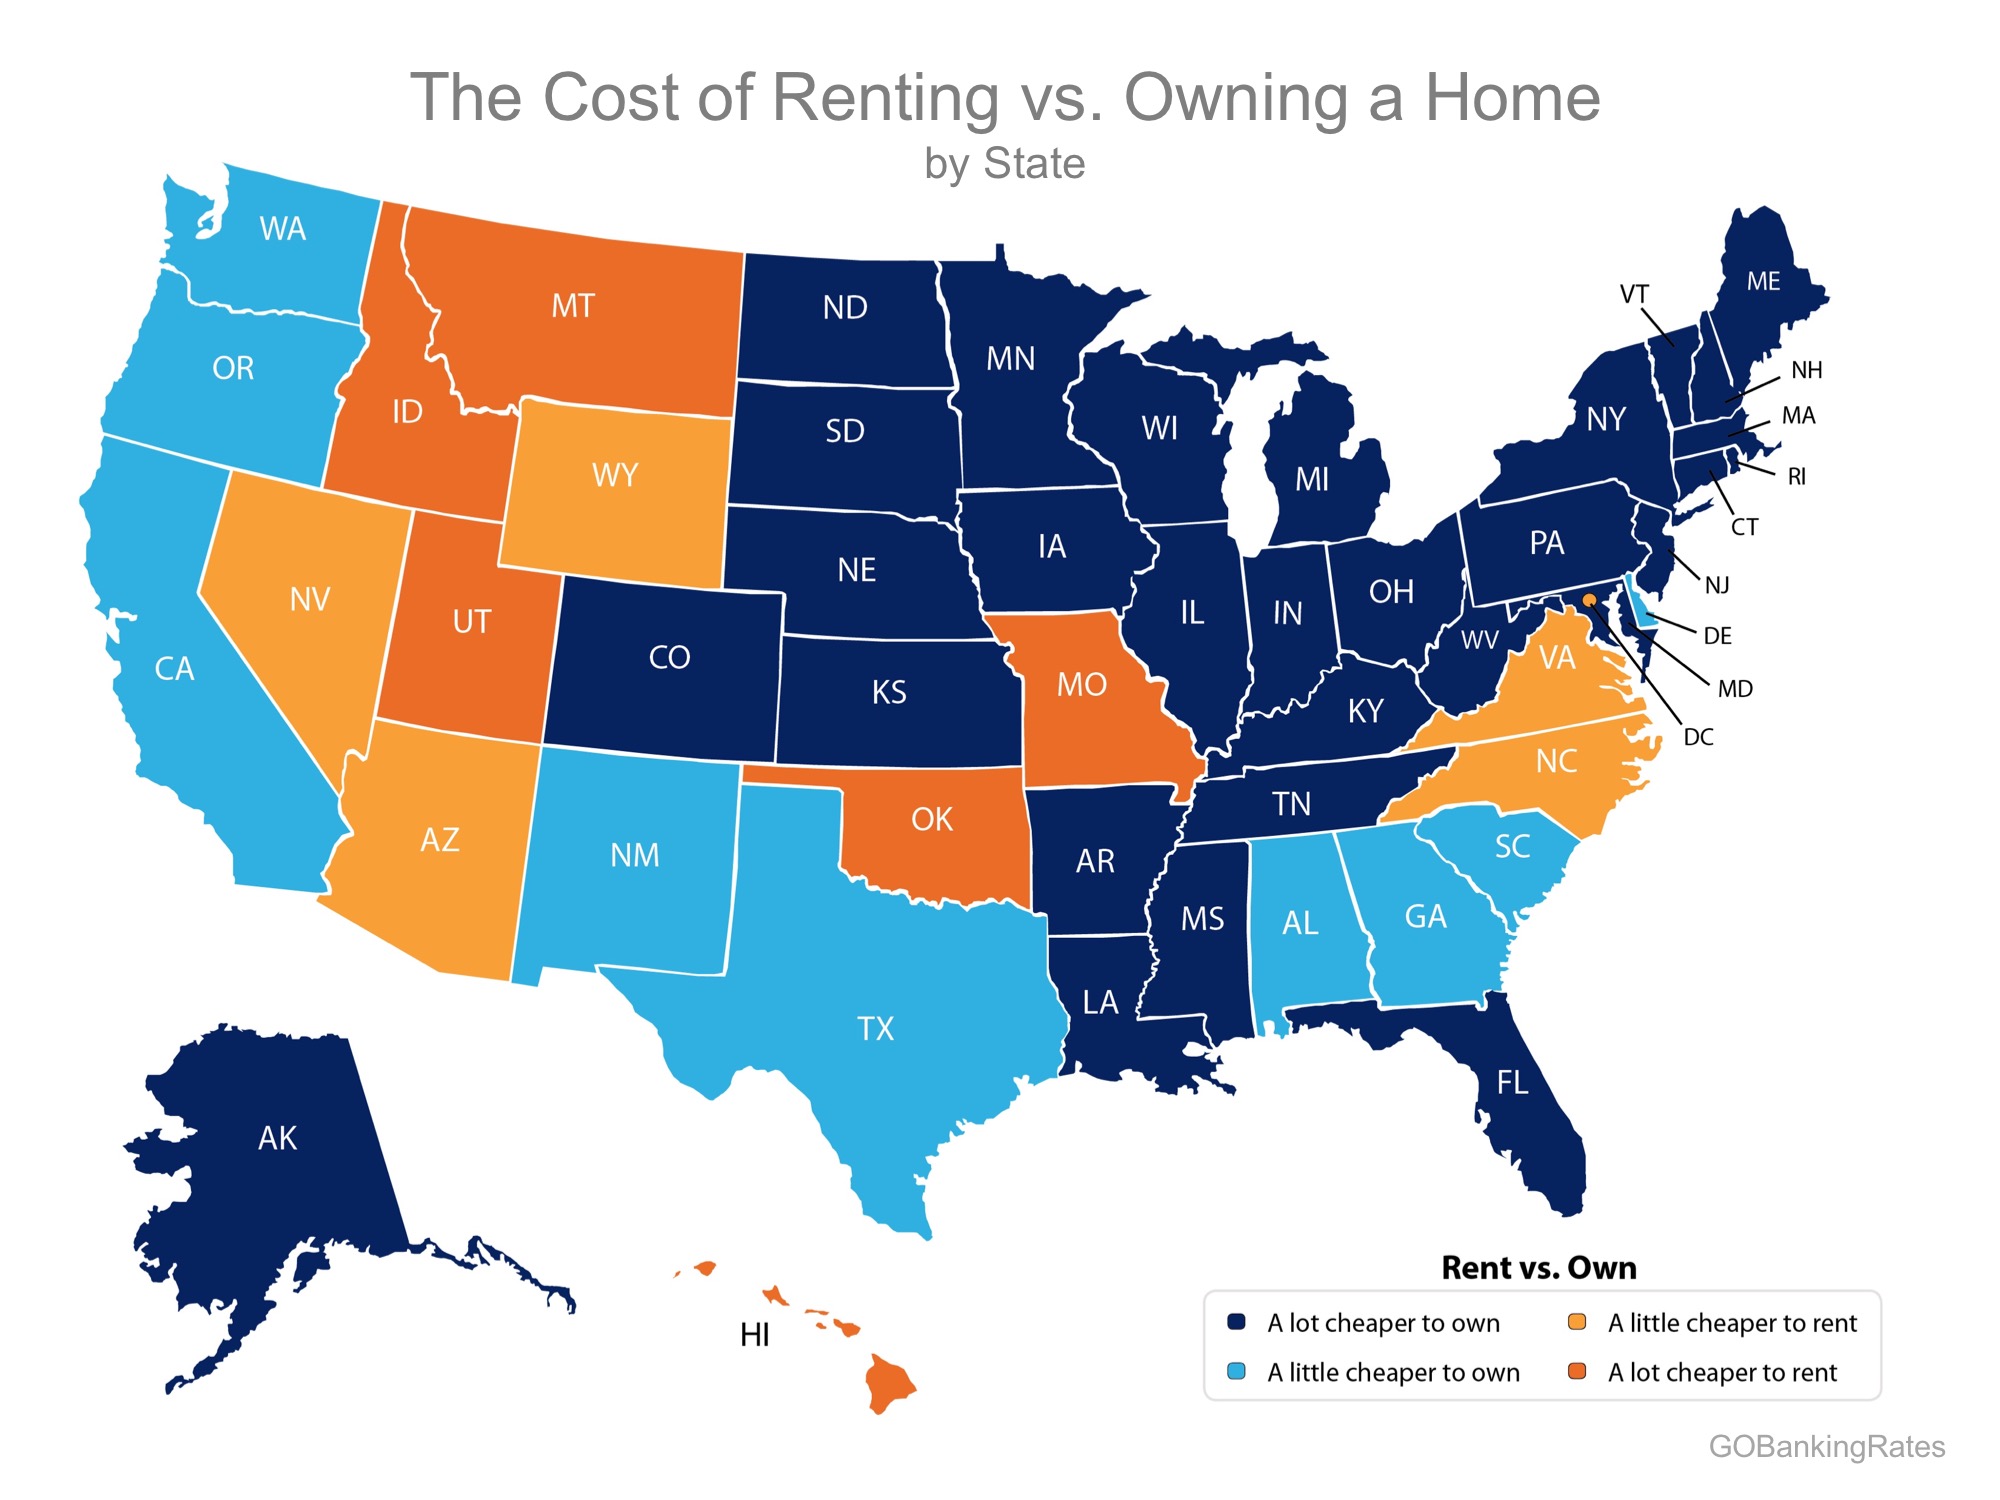 Buying Remains Cheaper Than Renting in 39 States! | MyKCM